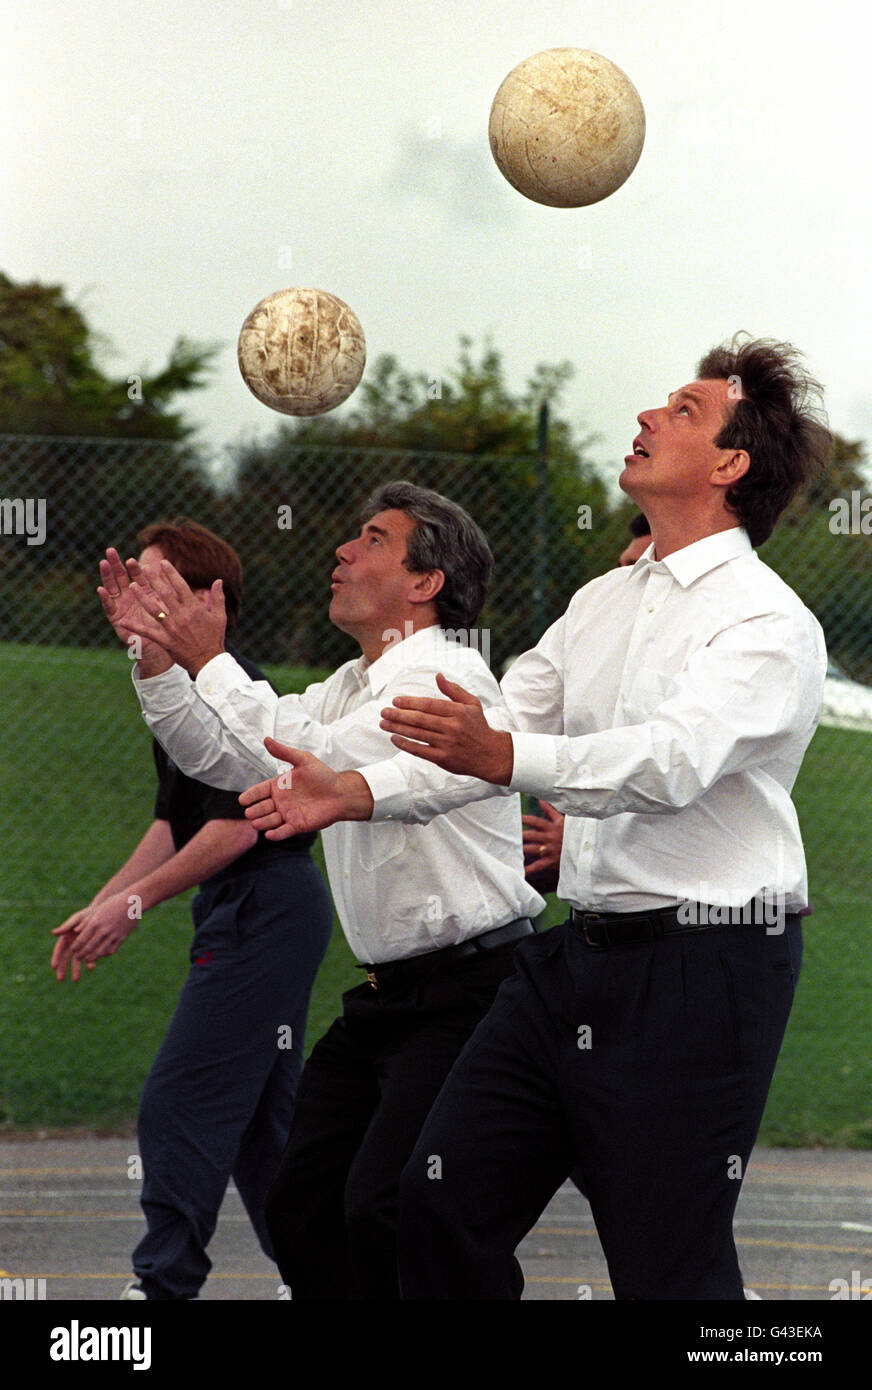 Labour leader Tony Blair (right) takes part in a ball-heading contest with Newcastle United boss Kevin Keegan in Brighton during a break in the party conference. R/I: 8.1.97. Keegan sensationally resigned as manager of Newcastle United. * saying that he no longer wanted to be in football management. * R/I: 17/2/99: The FA announced the appointment of Keegan as temporary England coach for the next four international matches. *19/10/03: Prime Minister Tony Blair was admitted to hospital where he underwent treatment for an irregular heartbeat. The 50-year-old Prime Minister spent almost five Stock Photo